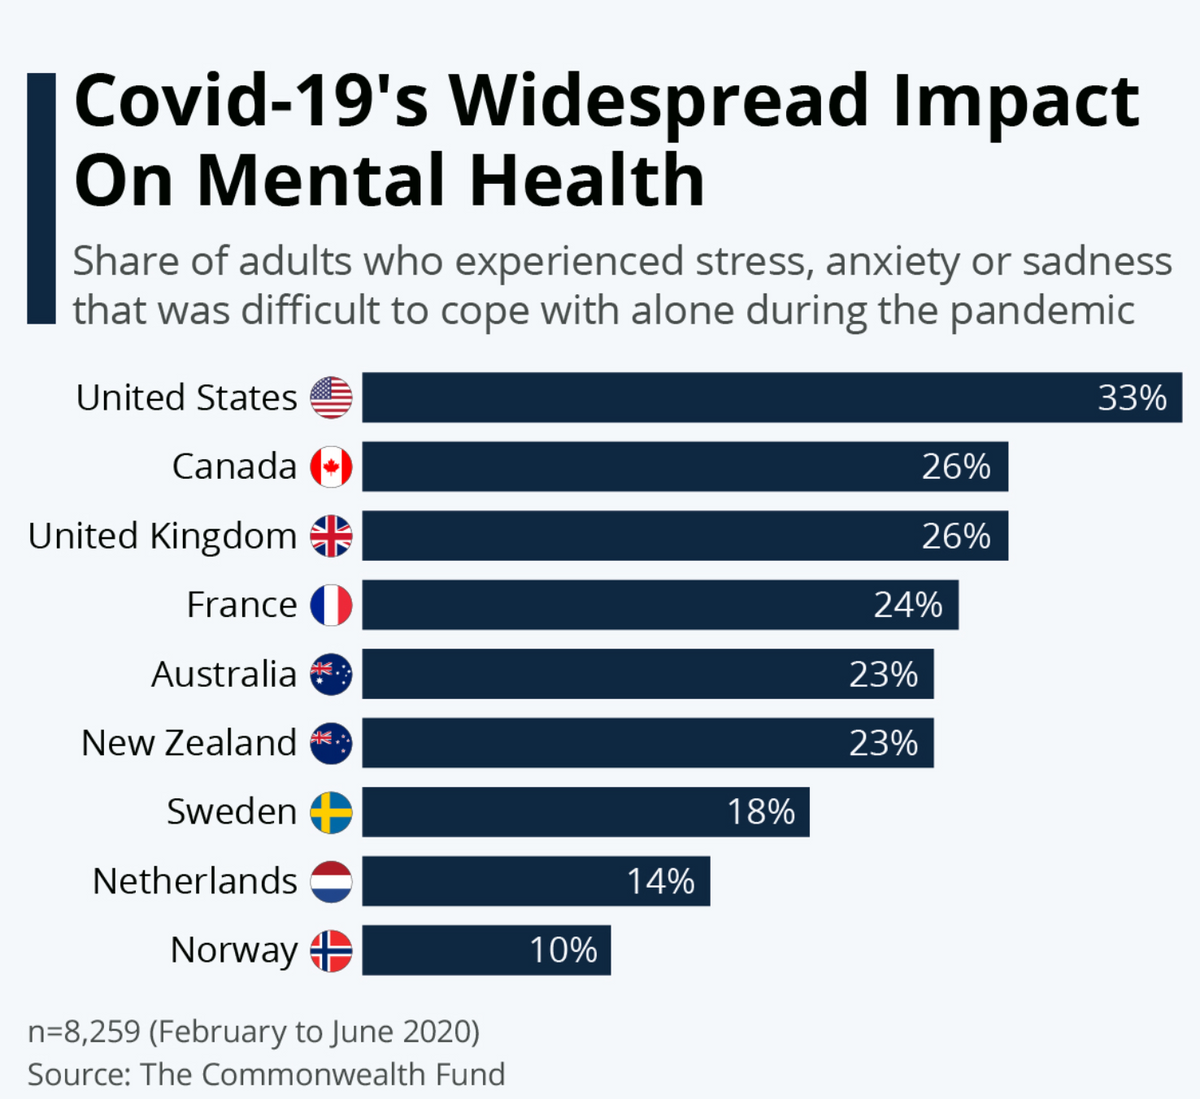 Covid-19's Widespread Impact
On Mental Health
Share of adults who experienced stress, anxiety or sadness
that was difficult to cope with alone during the pandemic
United States
33%
Canada (-)
26%
United Kingdom +
26%
France )
24%
Australia
23%
New Zealand
23%
Sweden
18%
Netherlands
14%
Norway +
10%
n=8,259 (February to June 2020)
Source: The Commonwealth Fund
